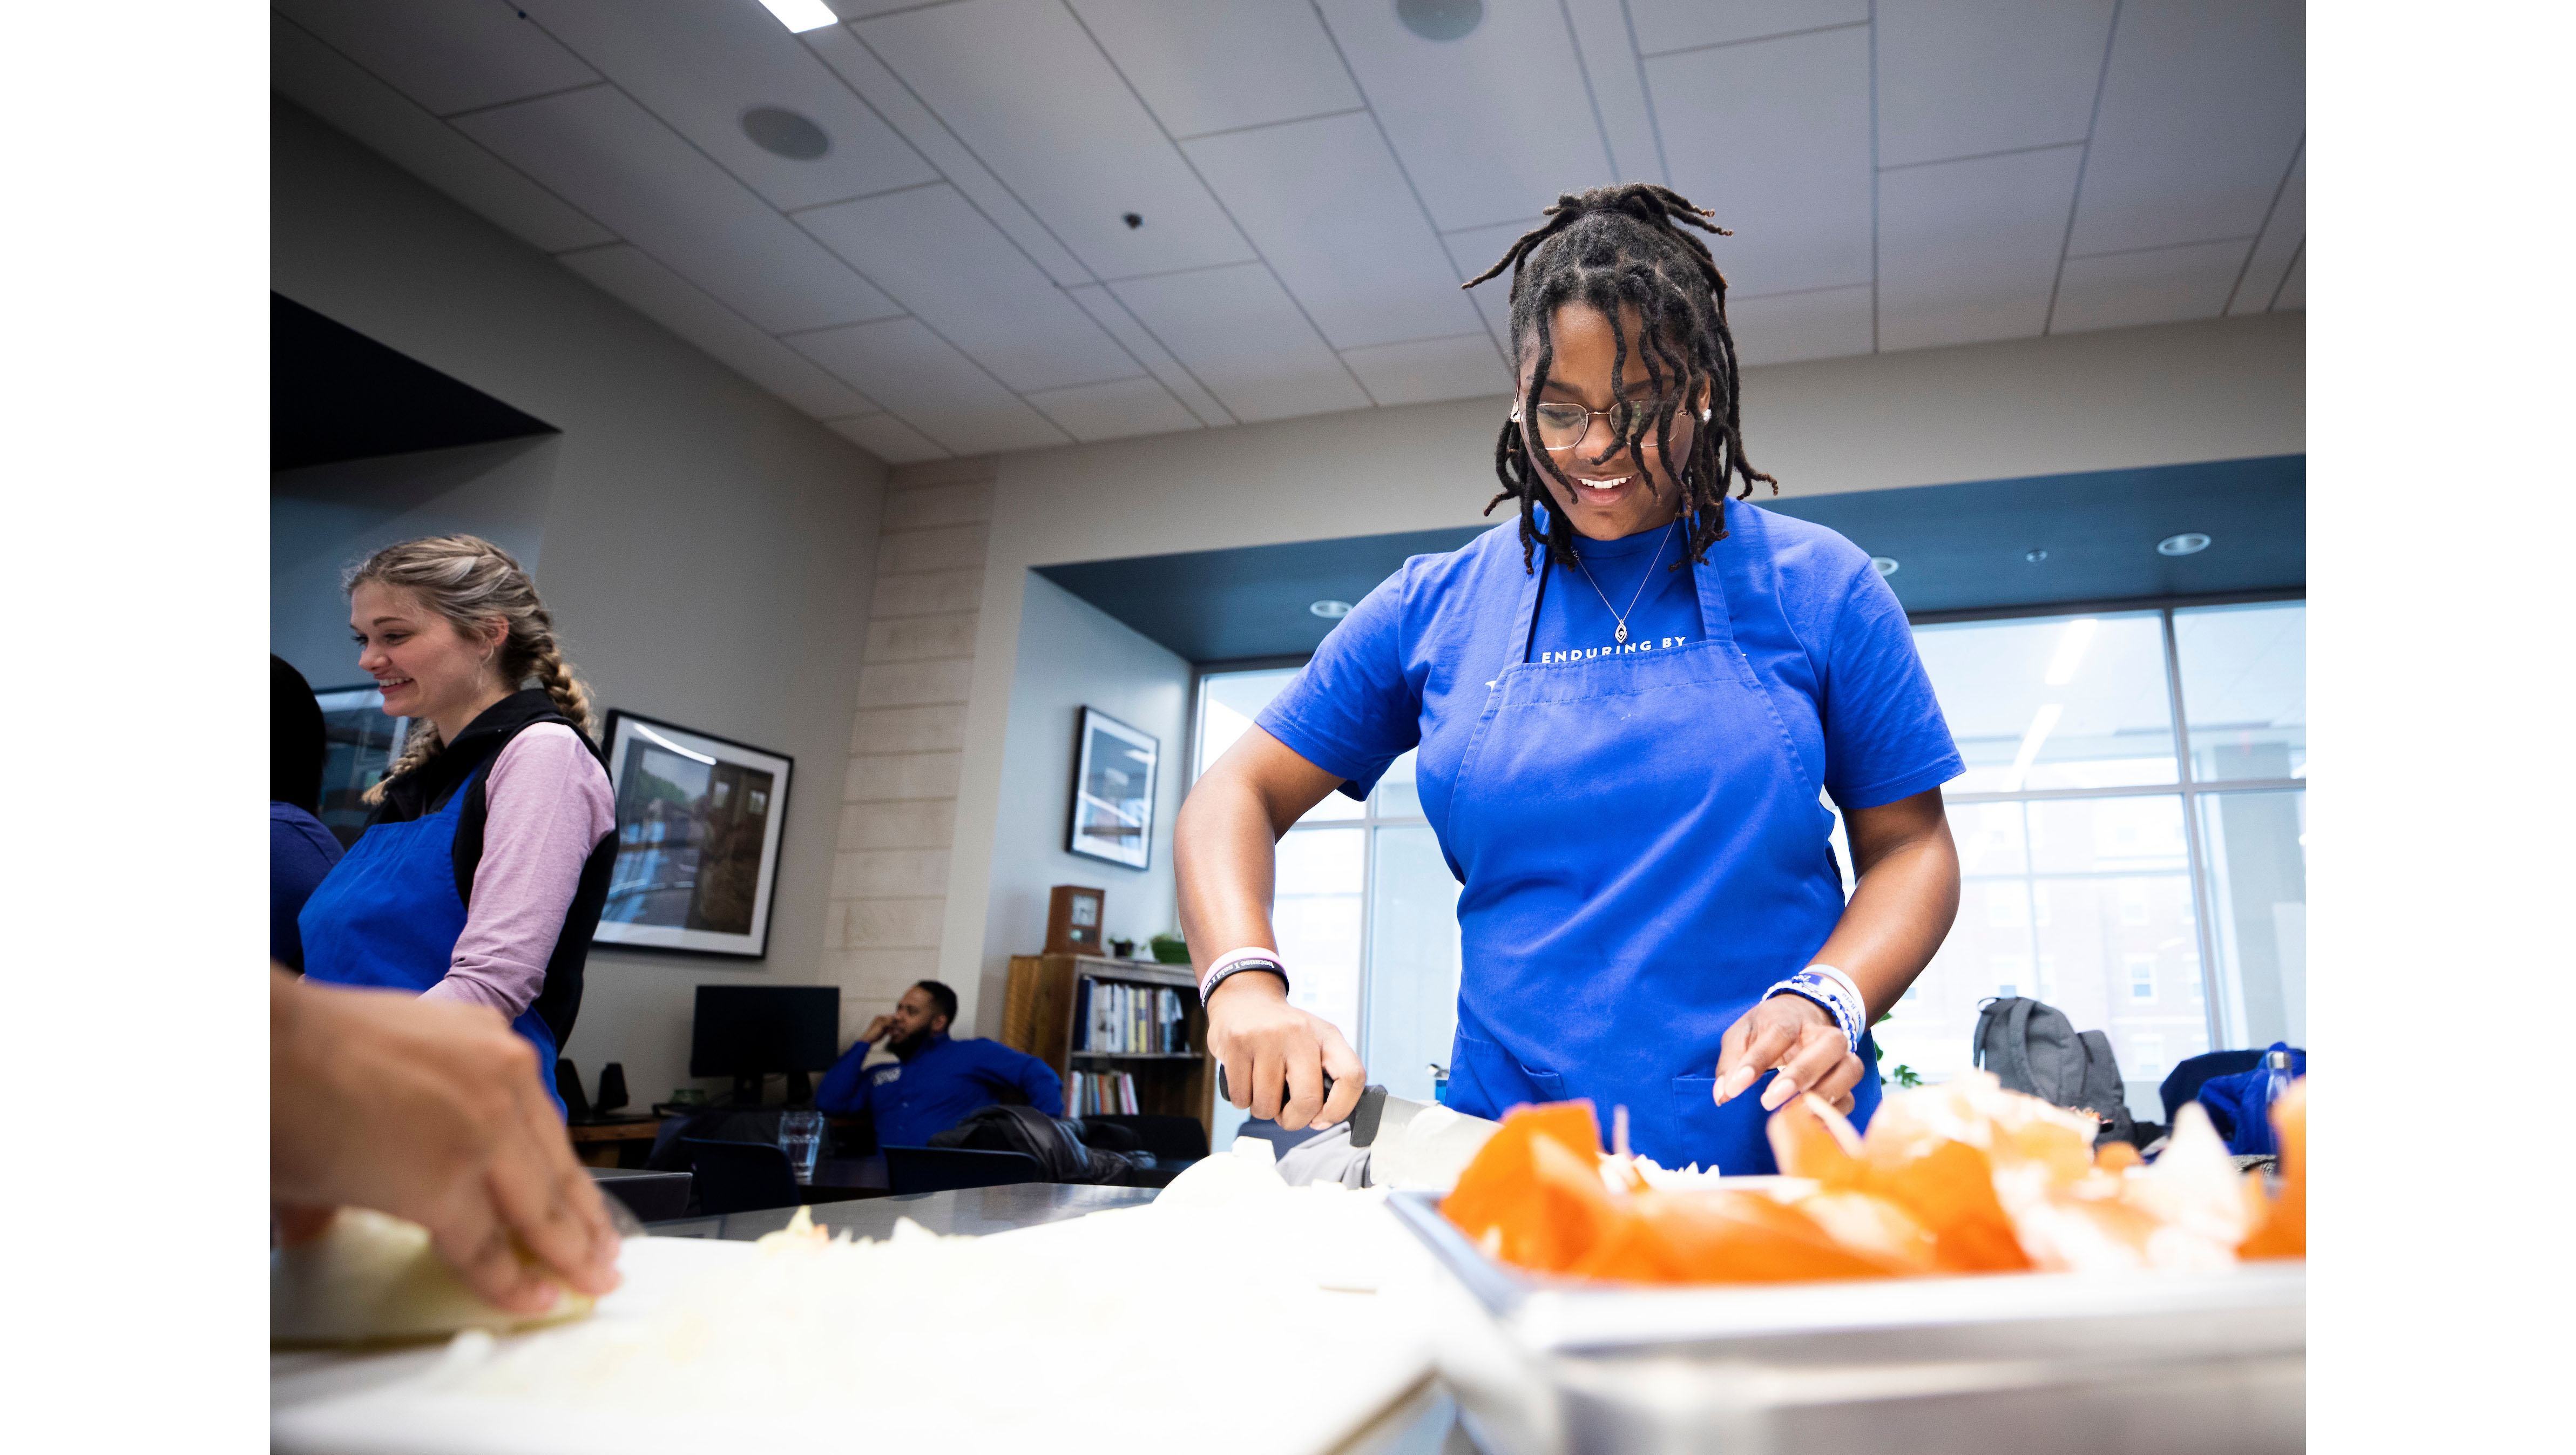 Cooking and nutrition is one area covered in the online adulting course being offered by the University of Kentucky. Photo by Pete Comparoni